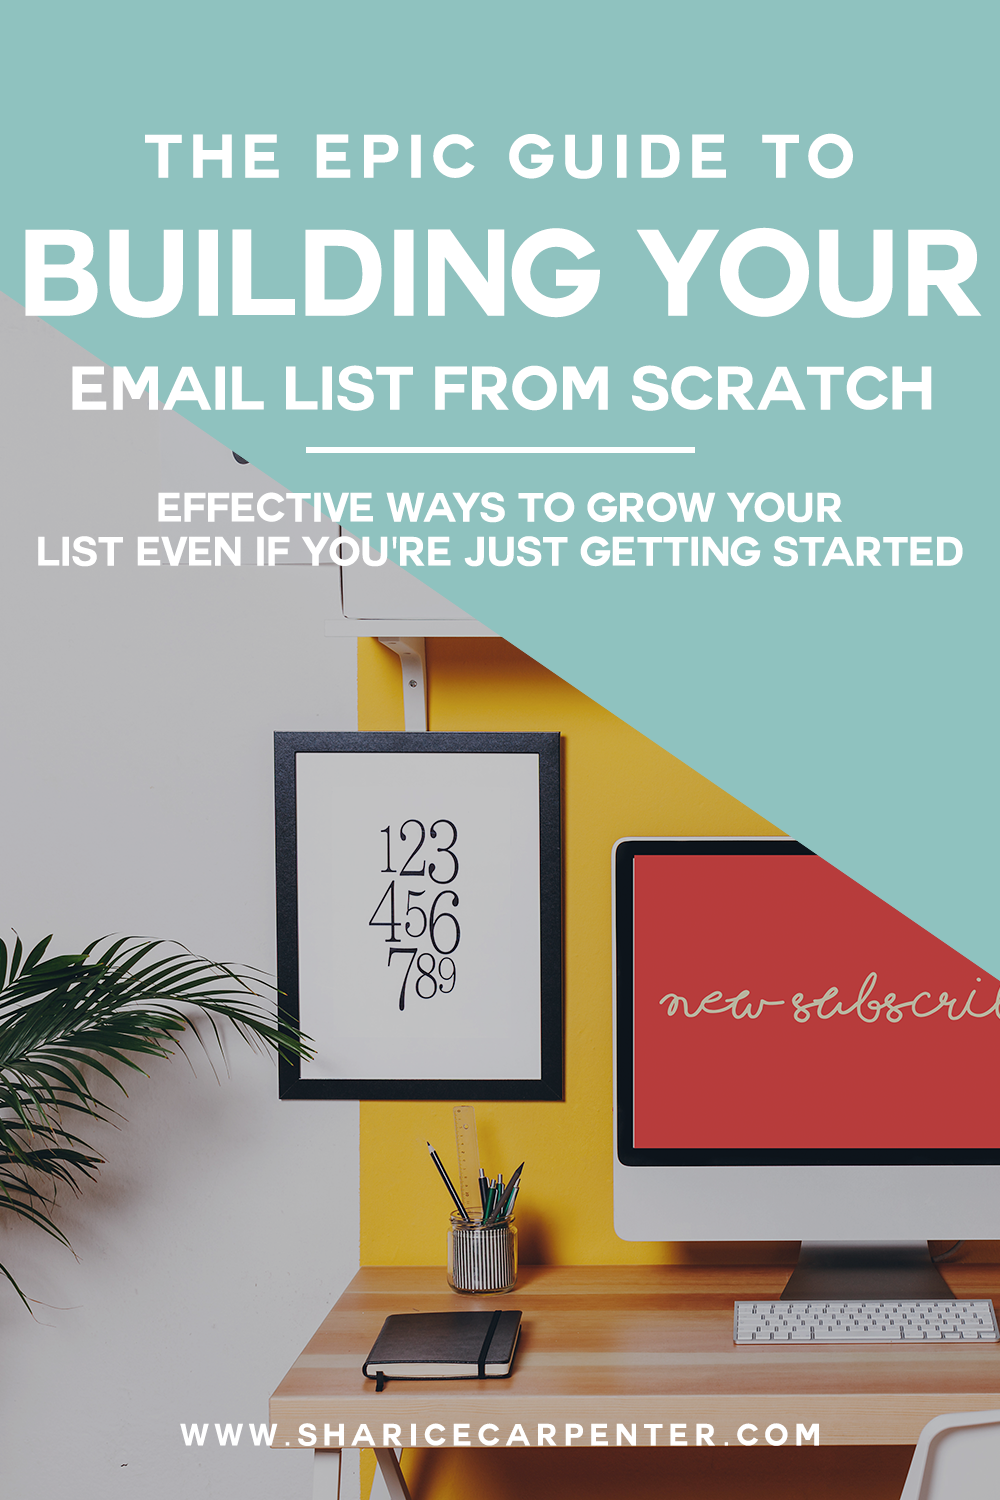 Fluff free methods to growing your email list even if you're just starting out, don't have a big social media following and have a budget of $0.